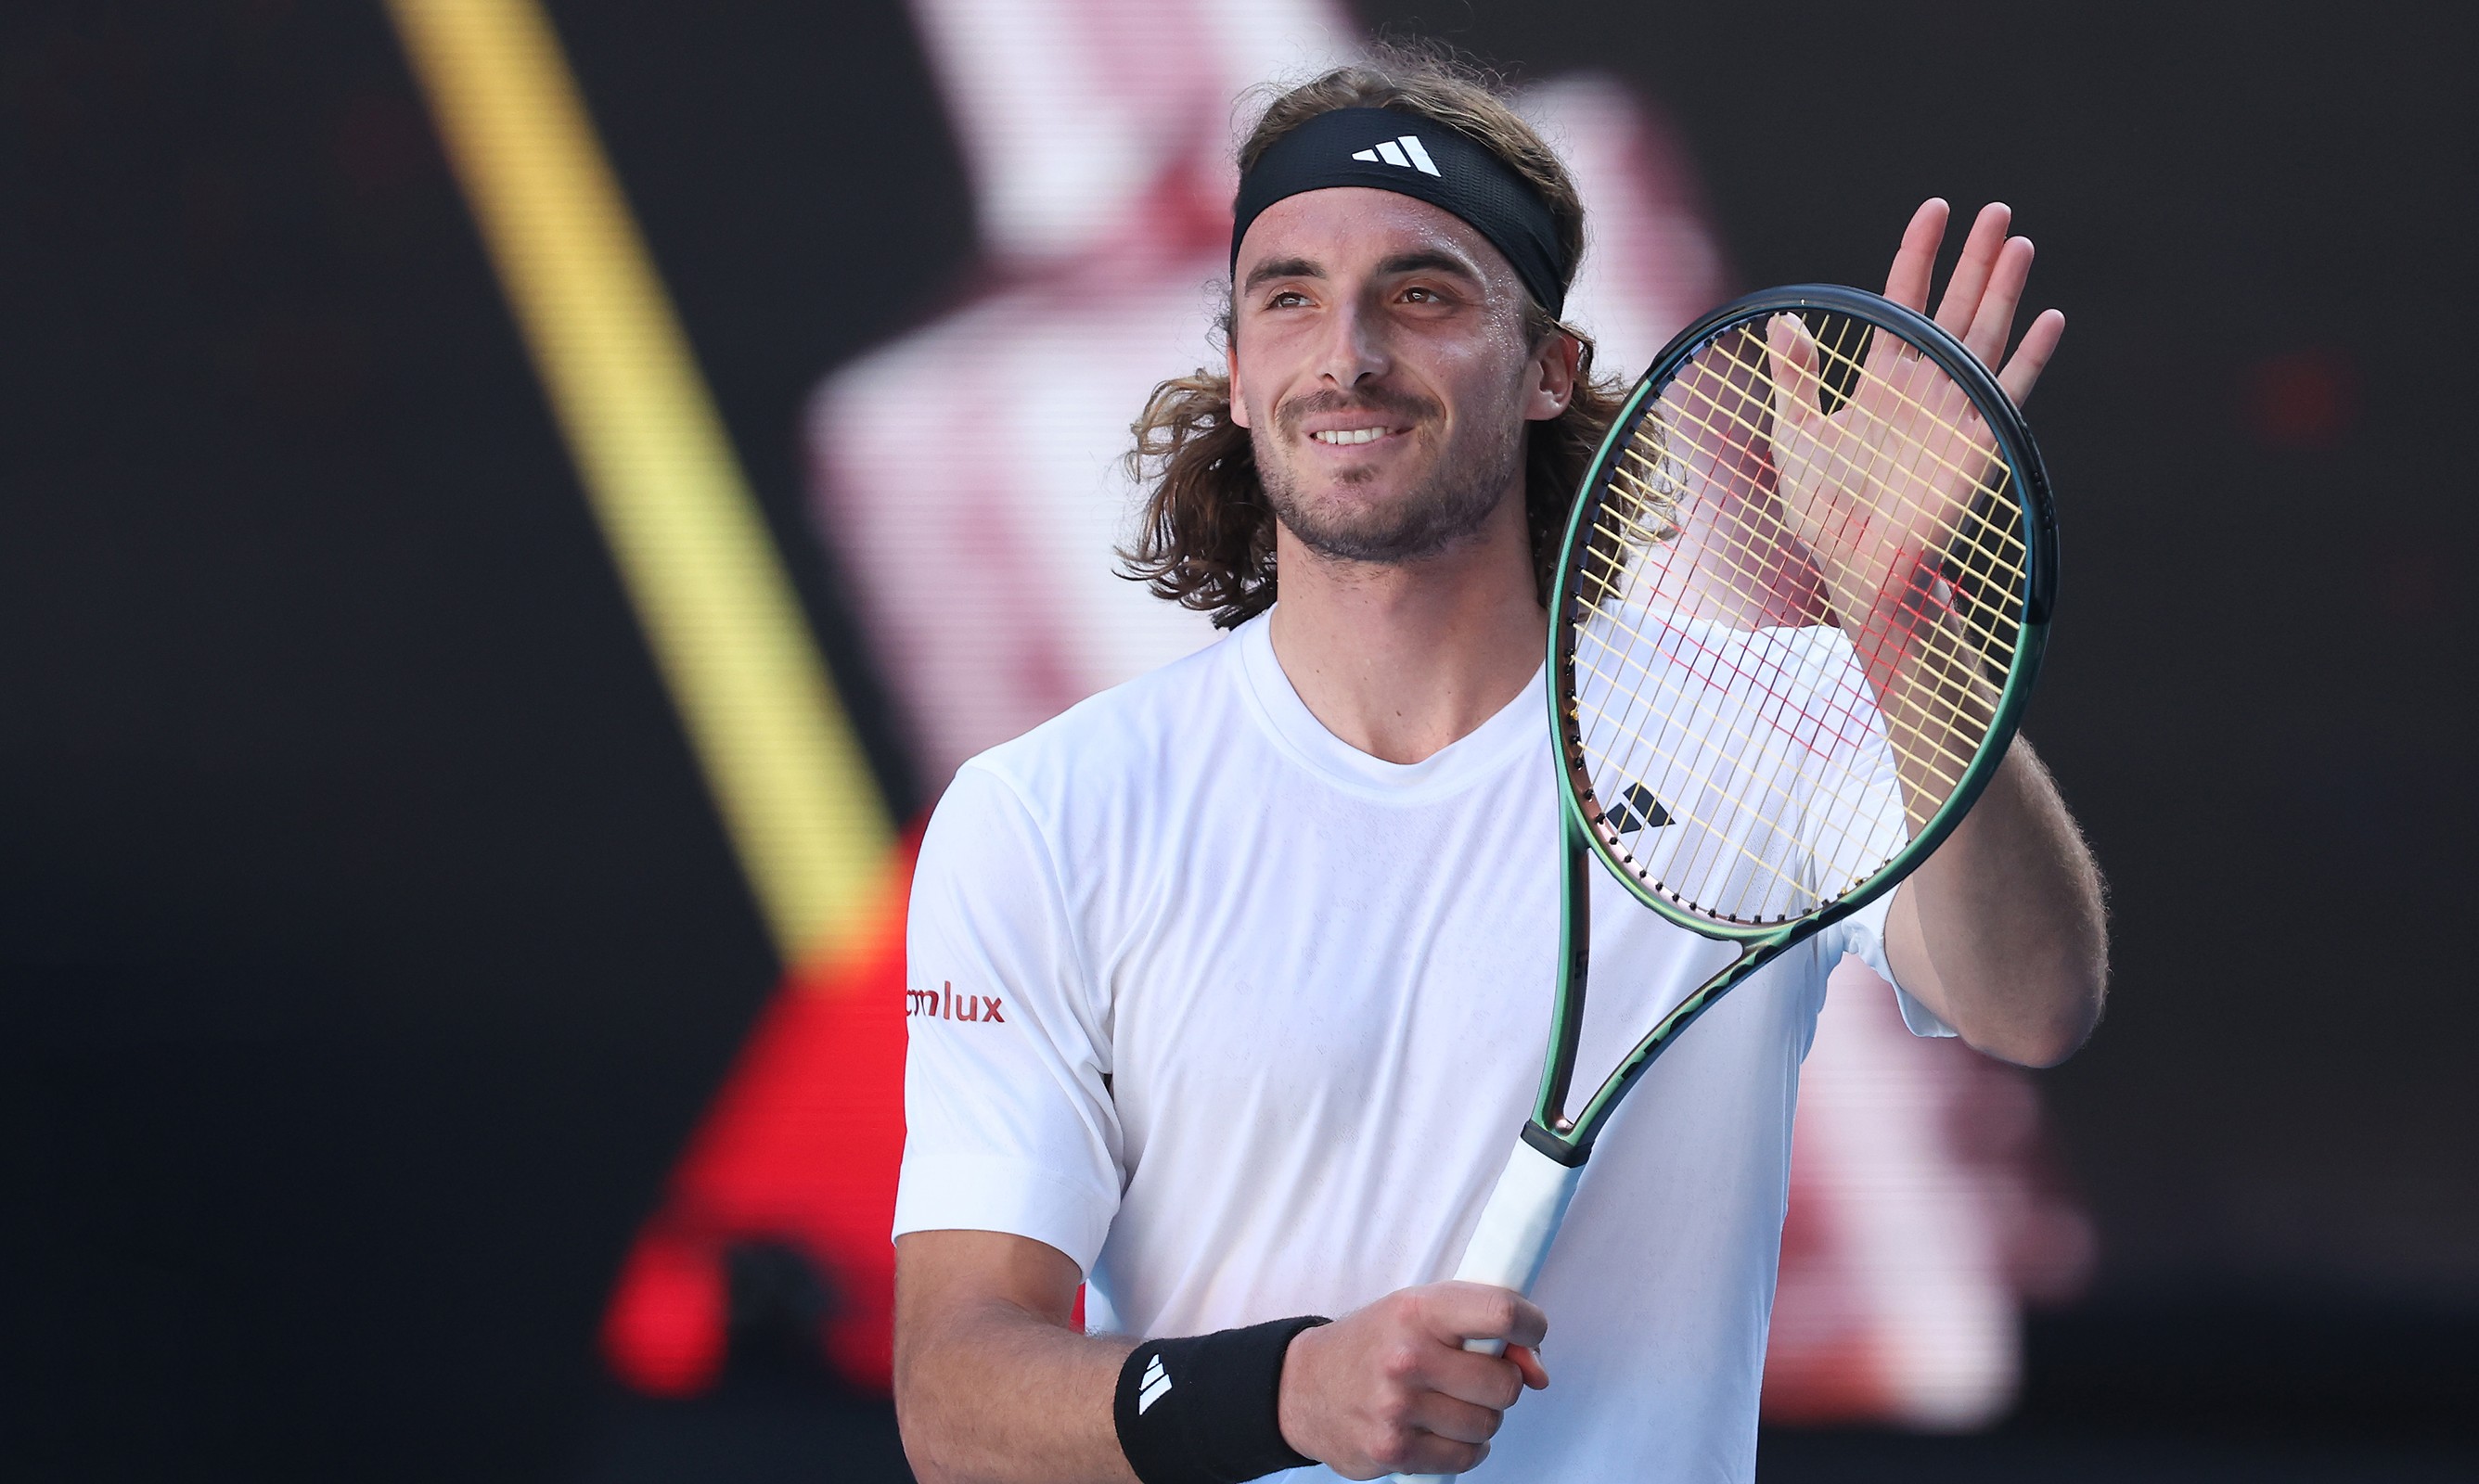 Stefanos Tsitsipas to play for Australian Open title and No. 1 ranking